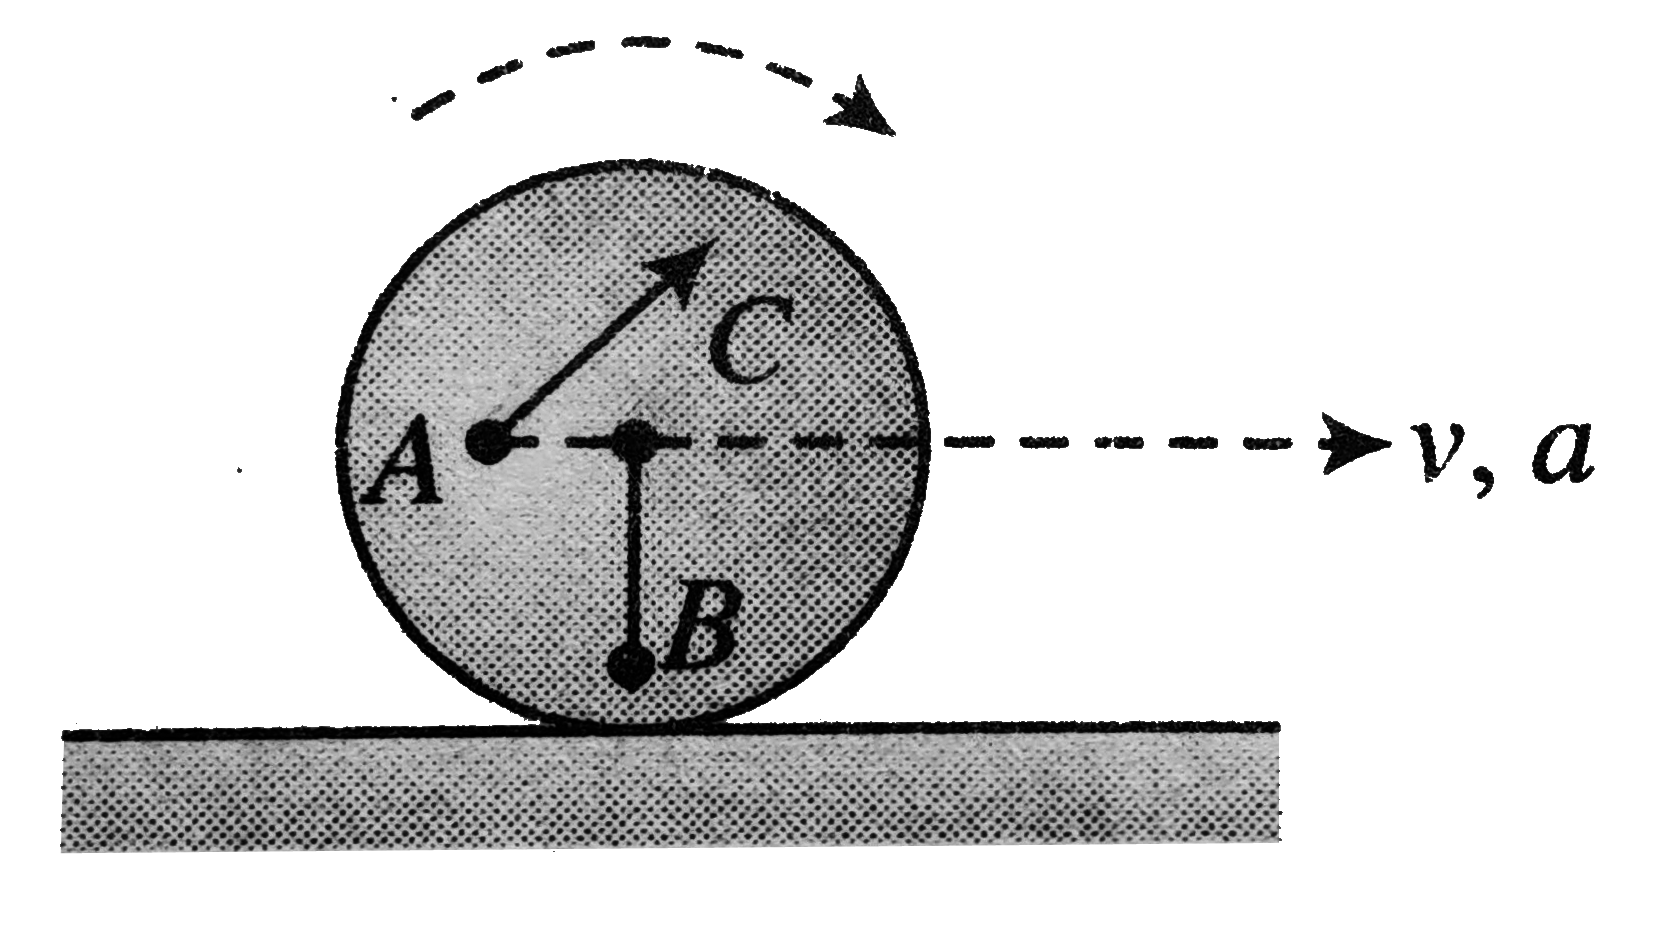 A uniform disc of mass 1 kg and radius 20 cm is rolling purely on a flat horizontal surface. Its centre C is moving with acceleration a = 20 ms^(-2) and velocity v =4 m//s at a certain instant. At this instant. points A and B are located on the disc as shown in the diagram, with AC = BC = 10 cm.     What is the acceleration magnitude of point A?